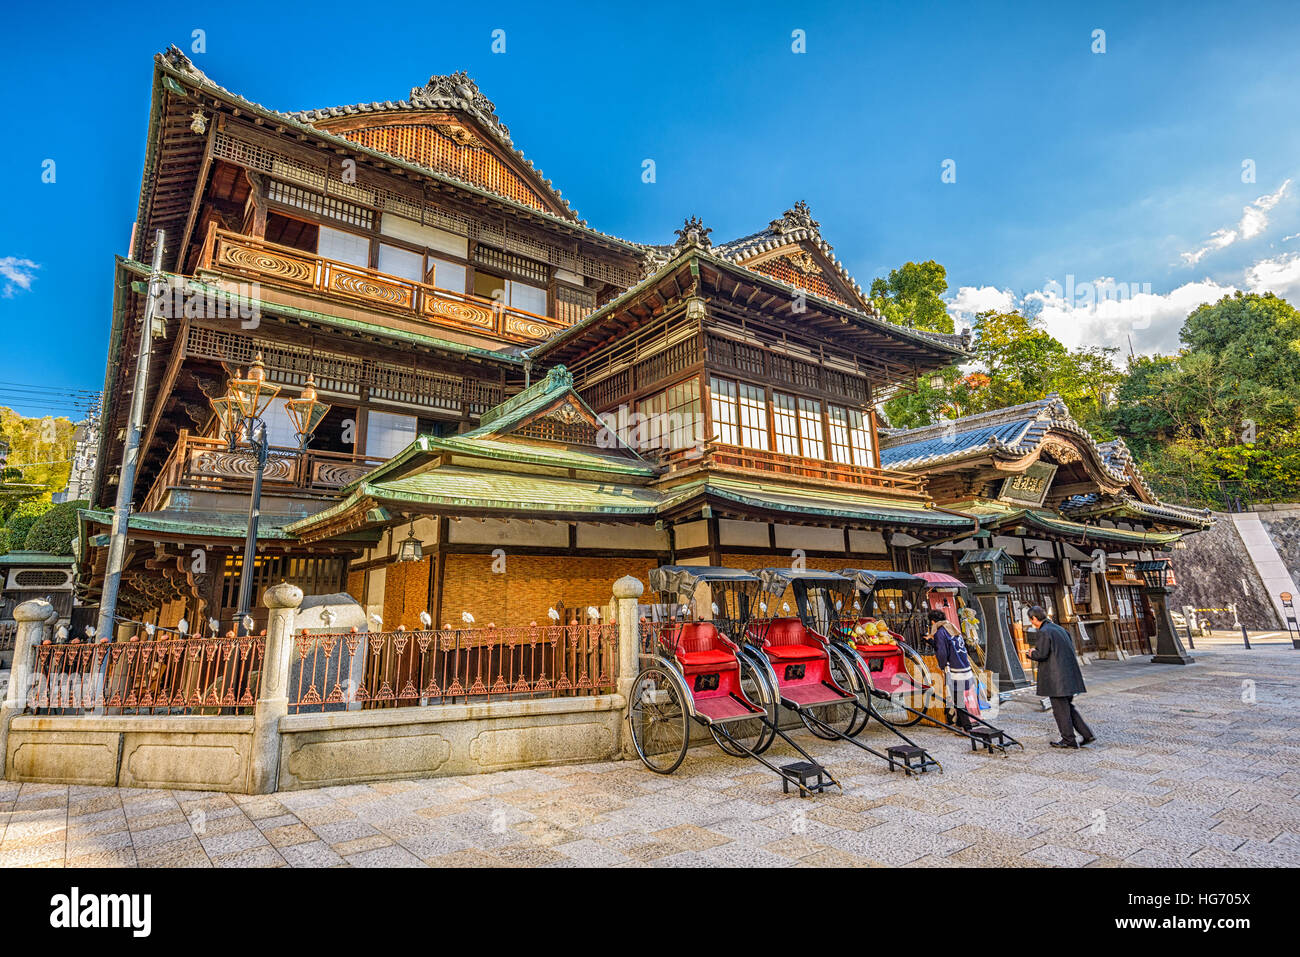 MATSUYAMA, JAPAN - DECEMBER 3, 2012: Workers at Dogo Onsen bath house. It is one of the oldest bath houses in the country. Stock Photo